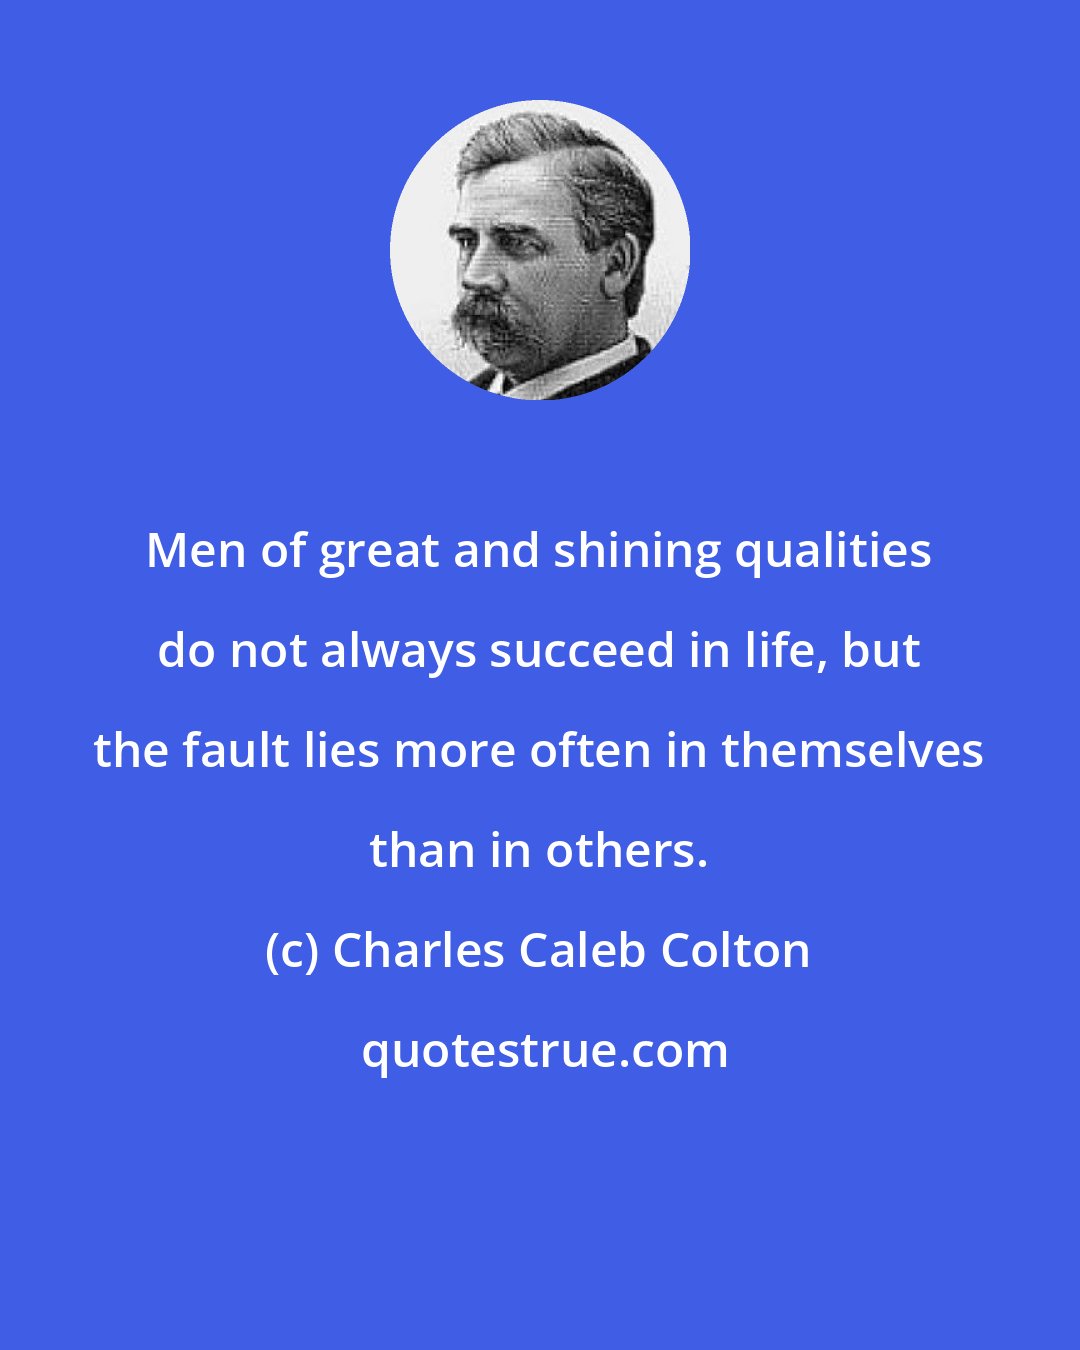 Charles Caleb Colton: Men of great and shining qualities do not always succeed in life, but the fault lies more often in themselves than in others.